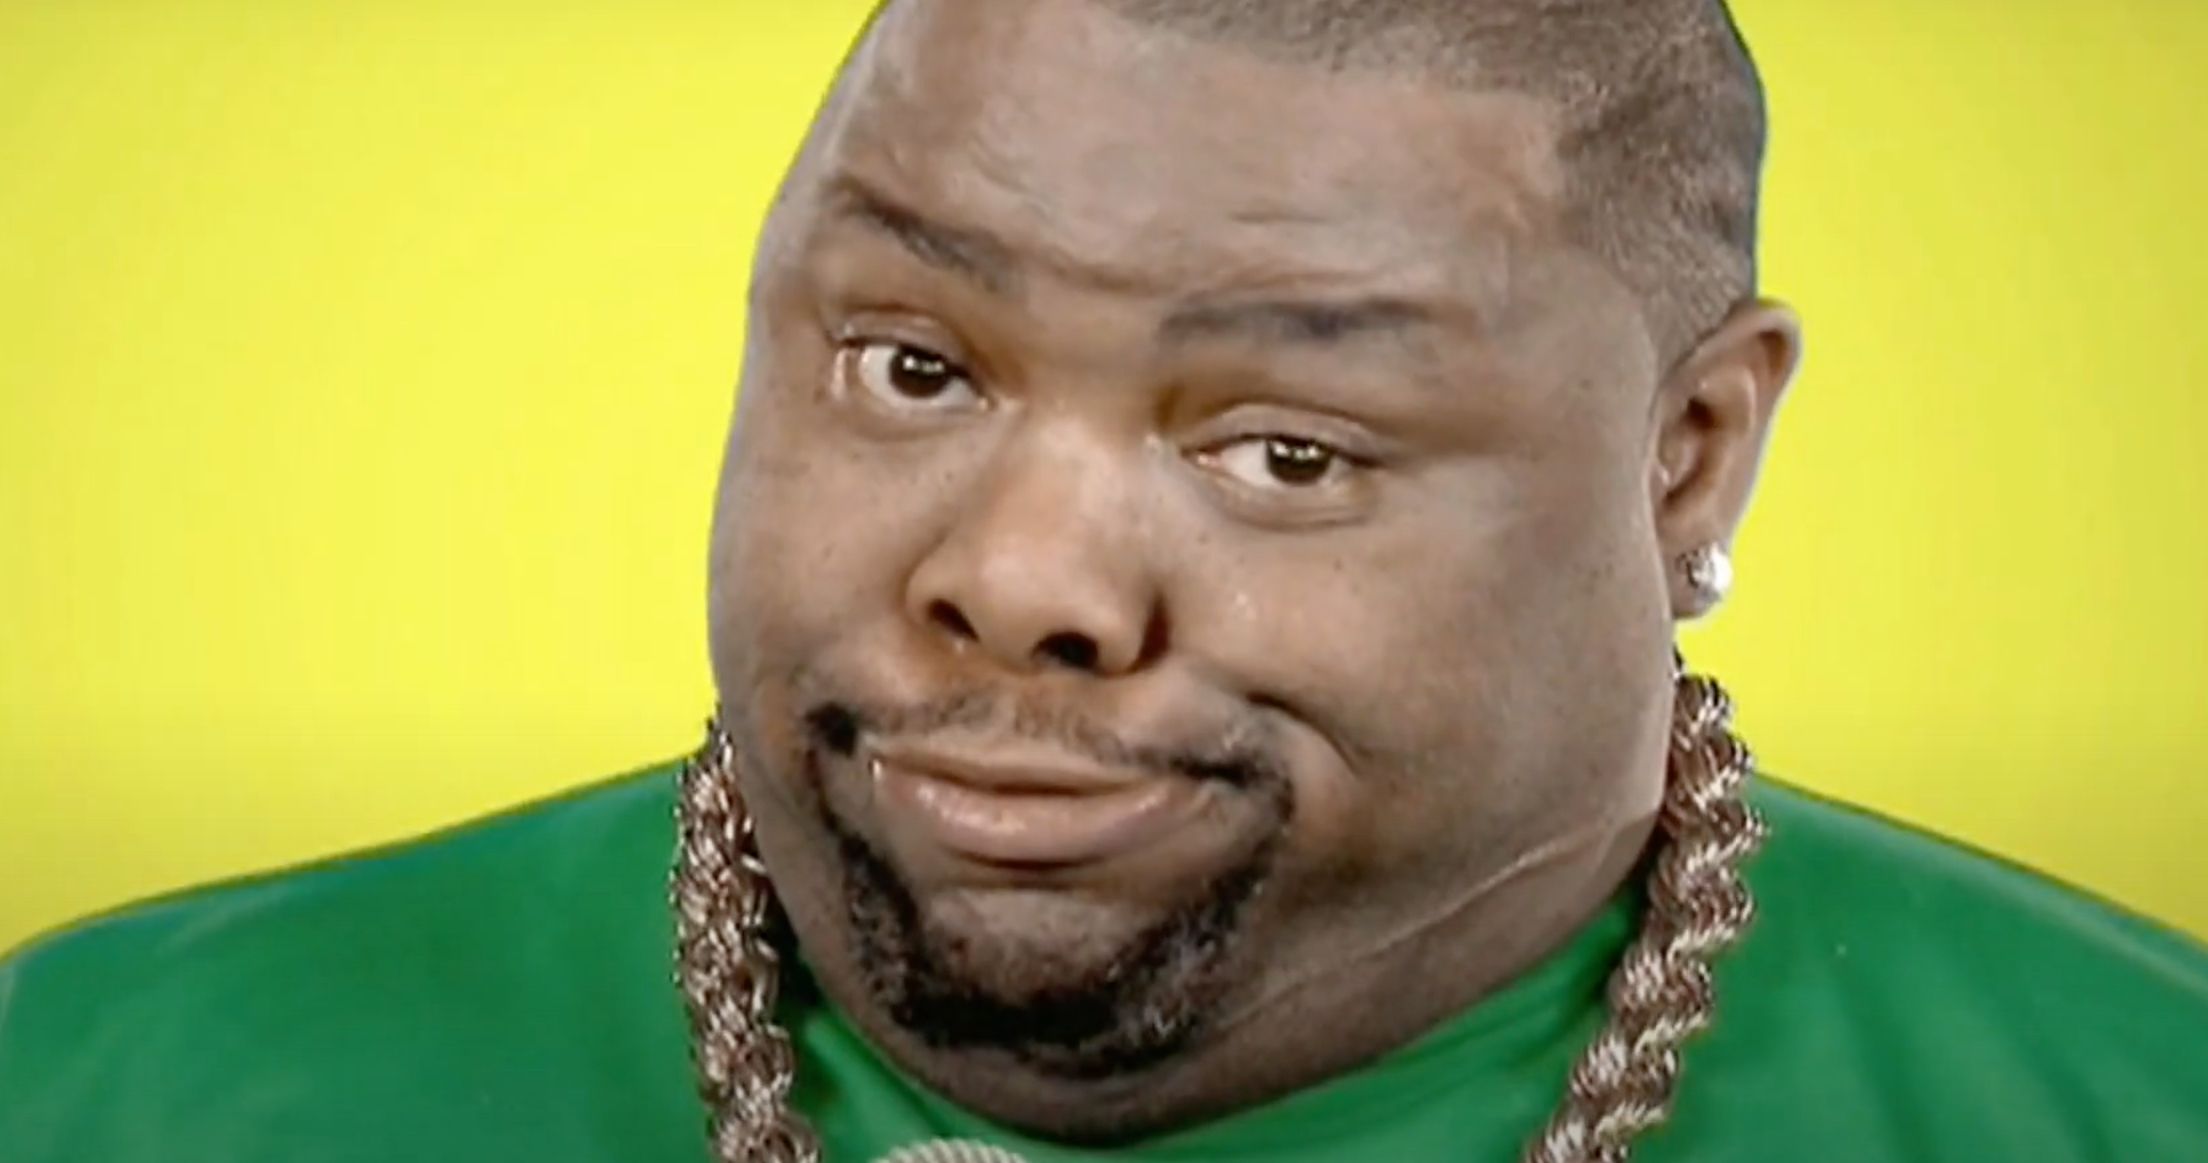 Biz Markie Is Under Medical Care as Family Asks for Continued Prayers